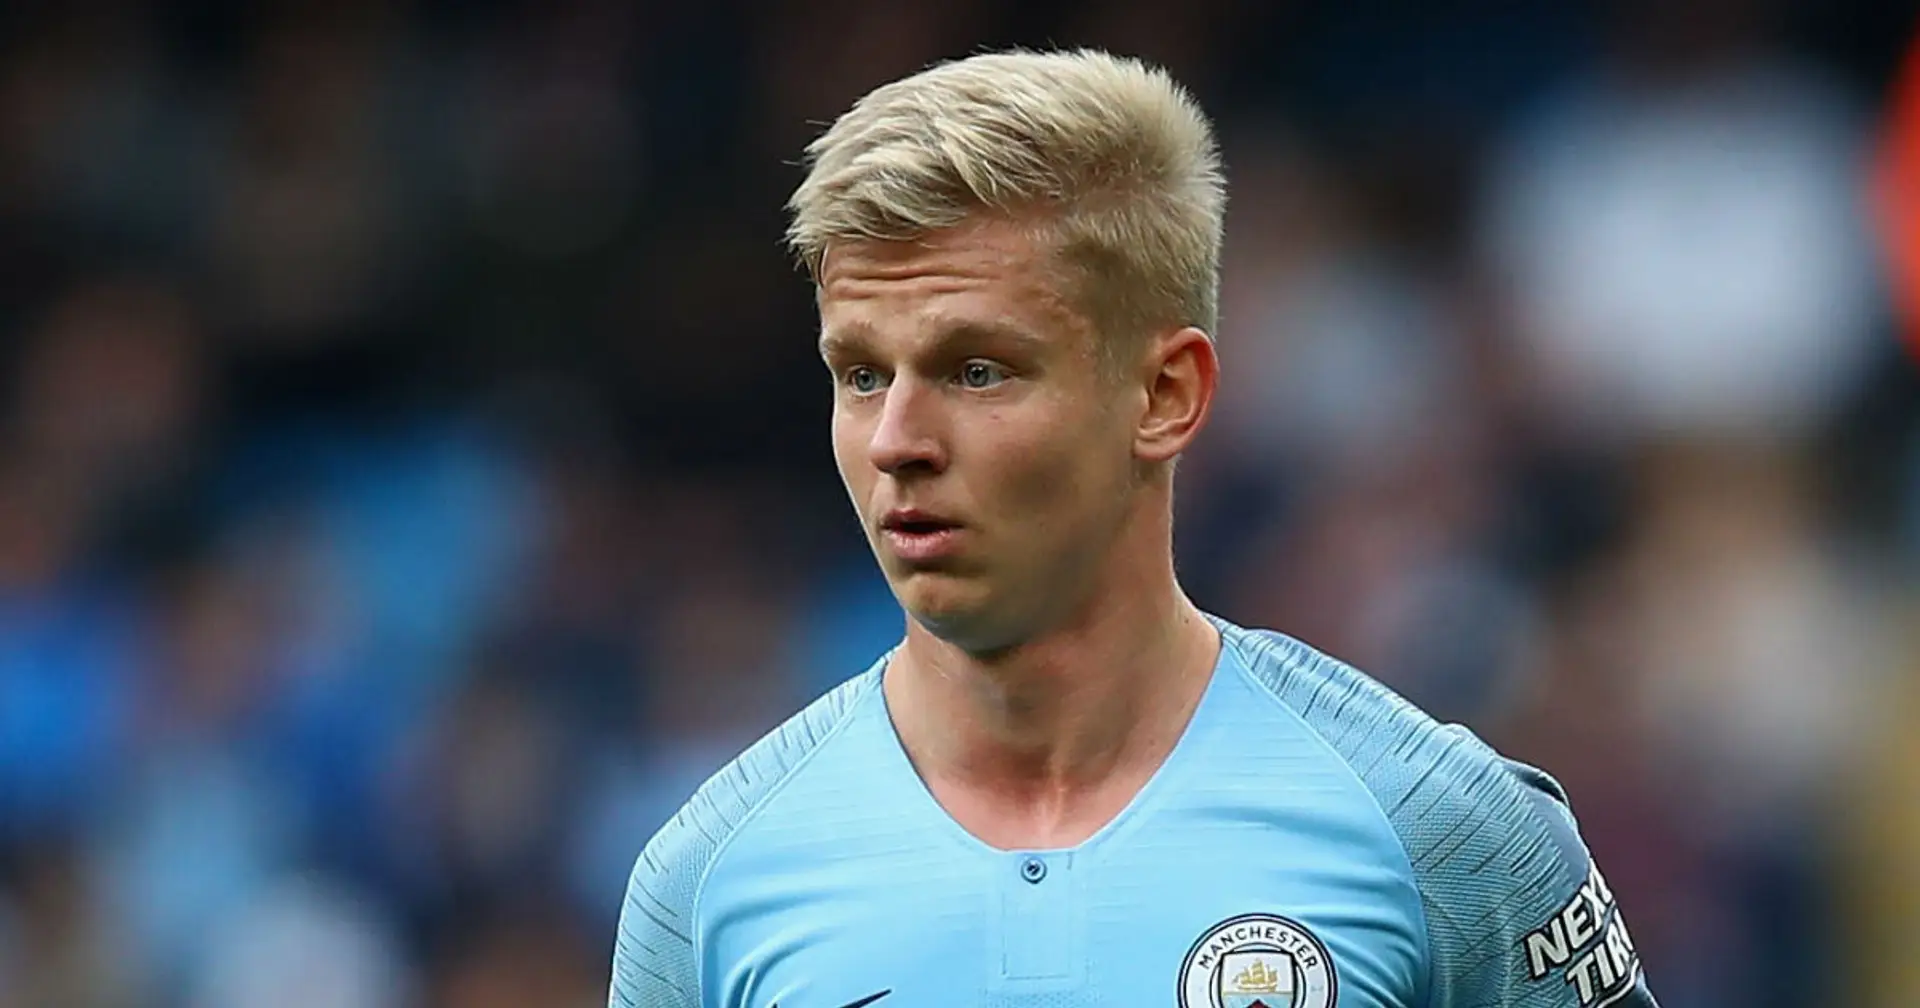 Zinchenko offered to Barca, Catalans to consider him only if Junior Firpo leaves (reliability: 4 stars)